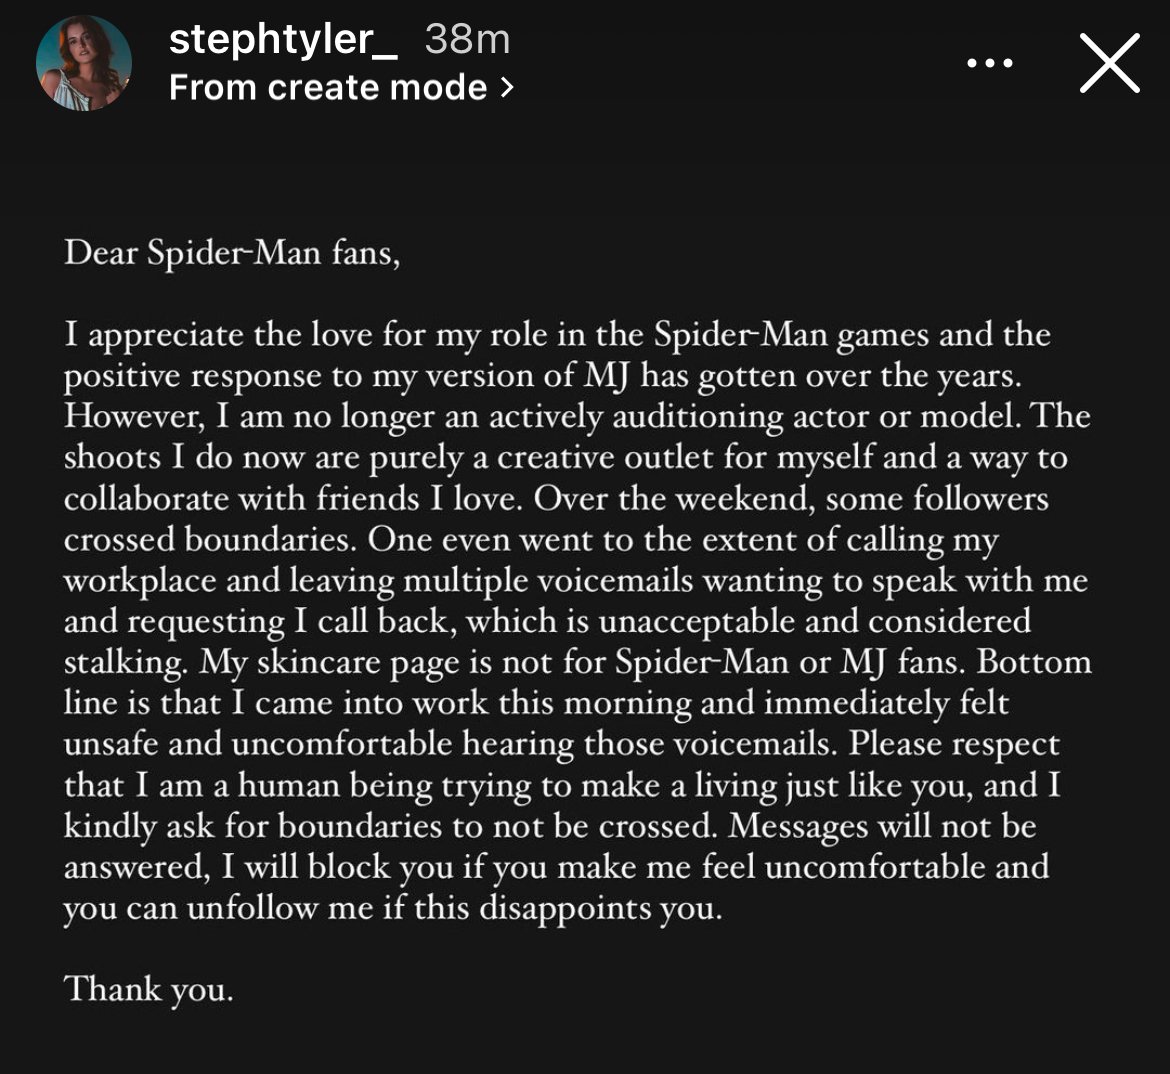 I hate that she's going through this, I hate how the Spider-Man fandom has become one of the sickest and most misogynistic fandoms possible. And for what? because of a fictional character? damn man, grow up, or better yet, fuck off u cowards!